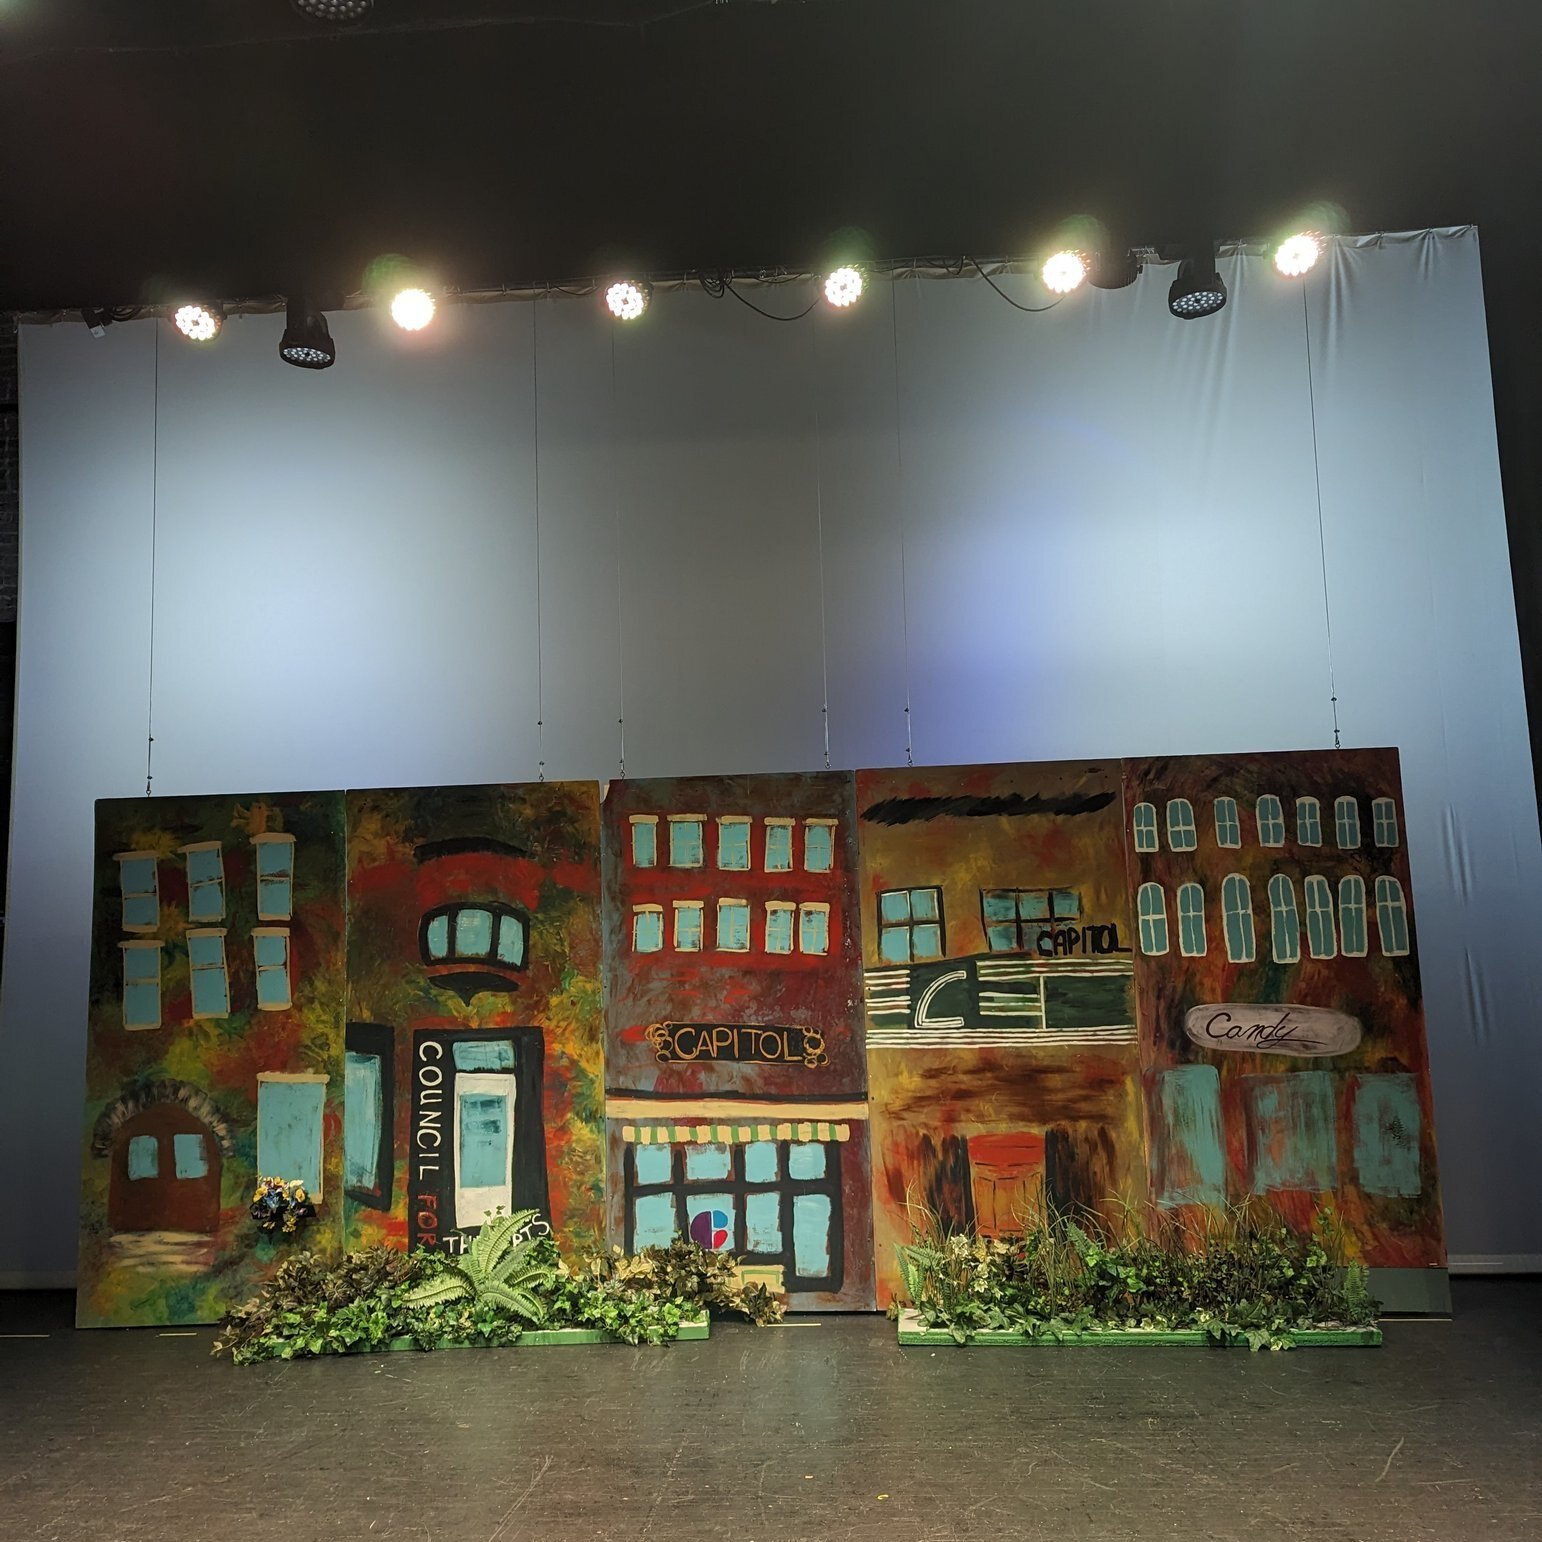 Did you help paint the scenery for Chambersburg Community Theatre's No Strings Attached during @IceFest Pa in January?
Get your tickets to see the play this weekend and see your artwork on stage!
cctonline.org